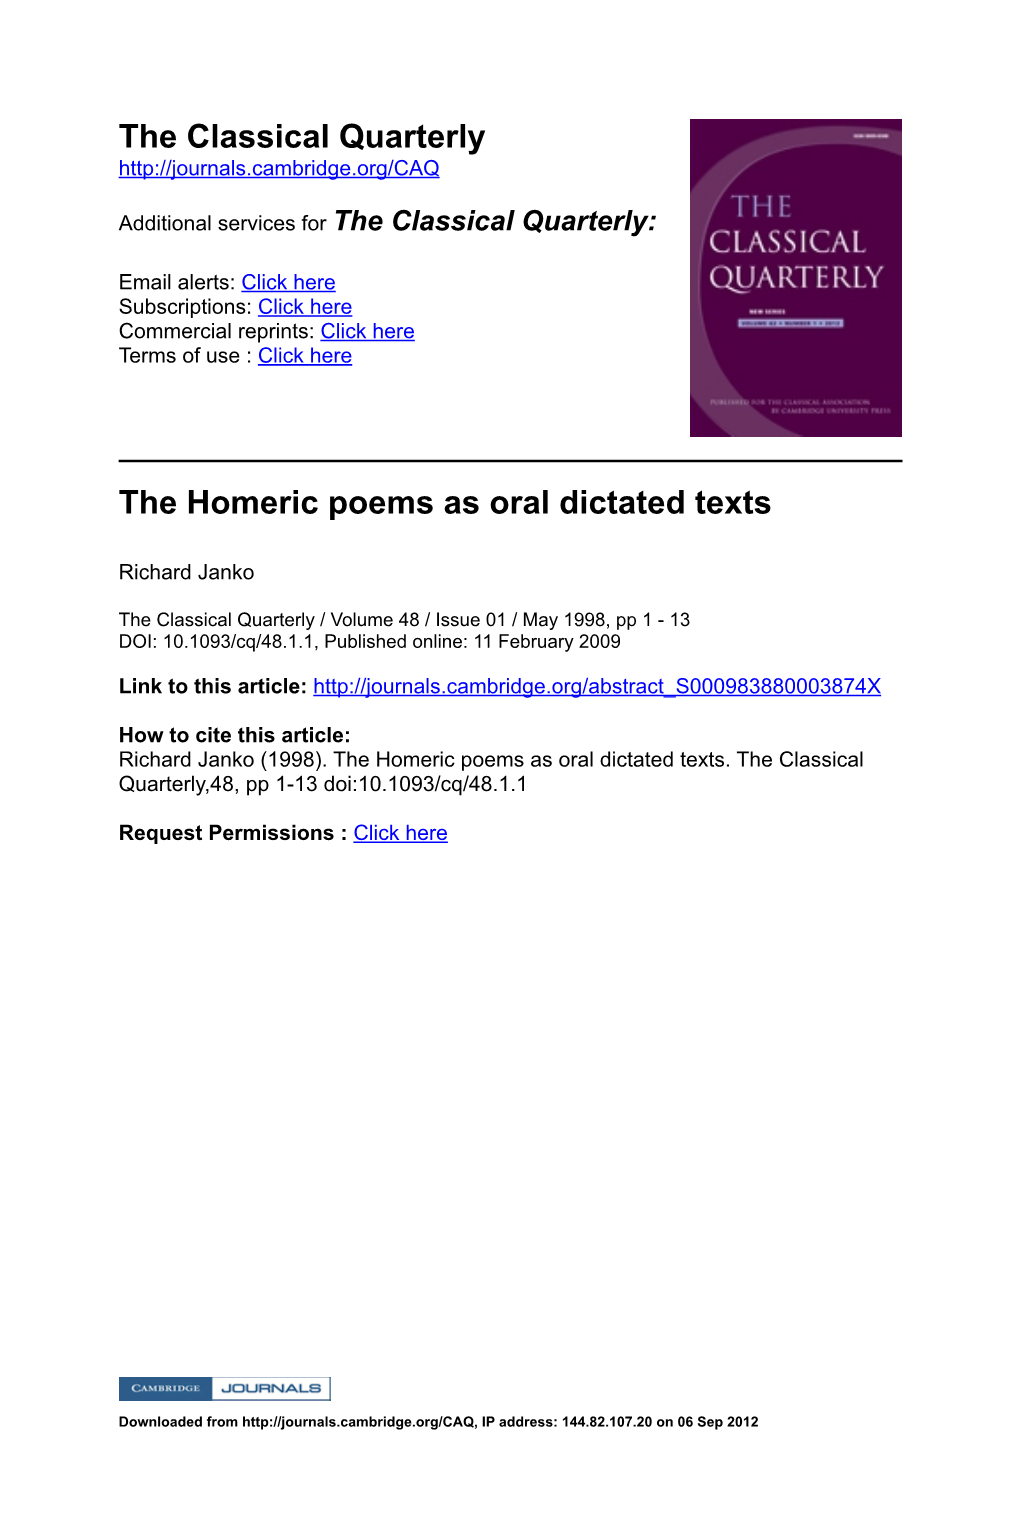 The Classical Quarterly the Homeric Poems As Oral Dictated Texts